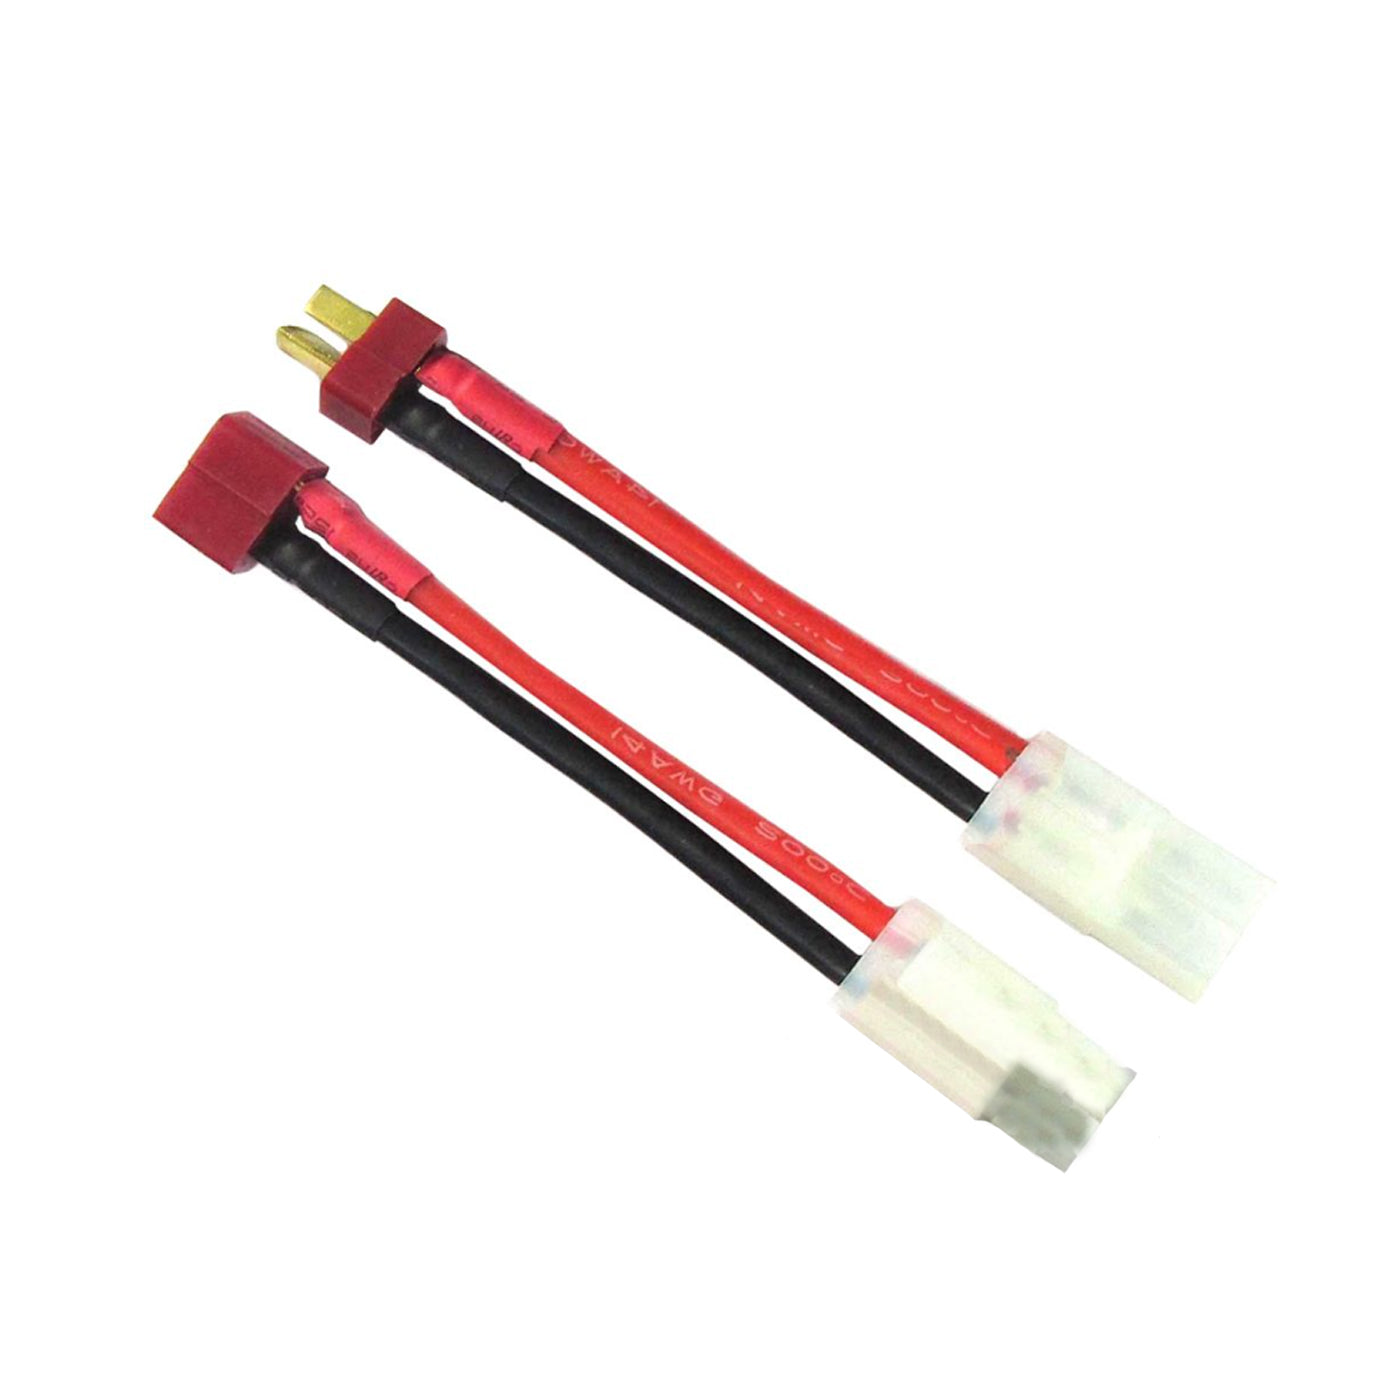 TRIMEX SMALL TAMIYA TO DEANS PLUG WIRING CONVERSION SET FOR AIRSOFT